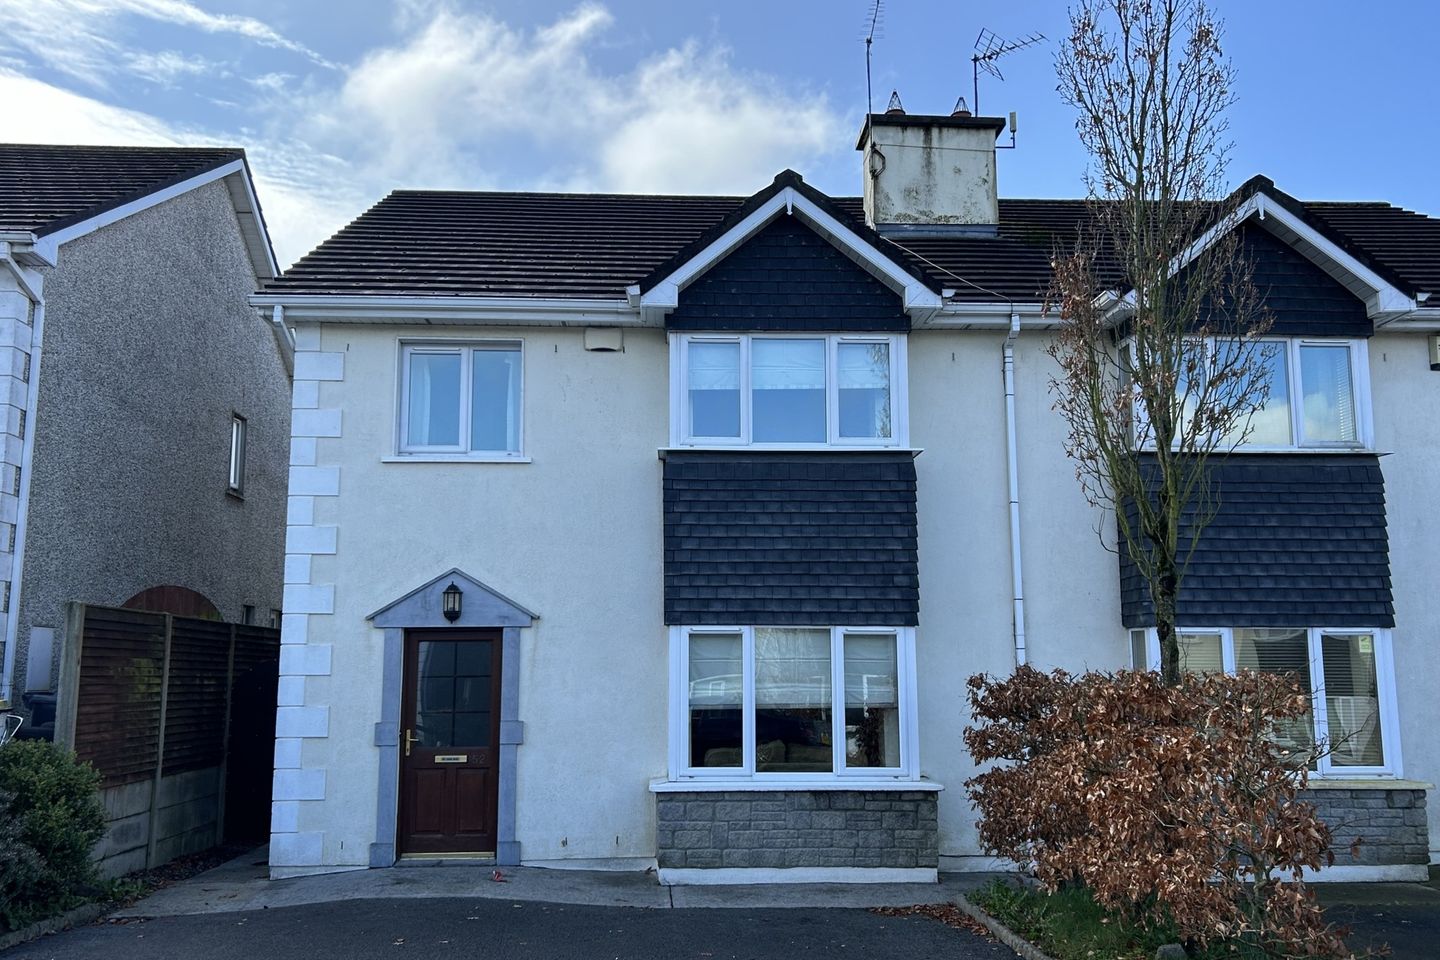 52 Rockwood, Old Road, Cashel, Co. Tipperary, E25PV25